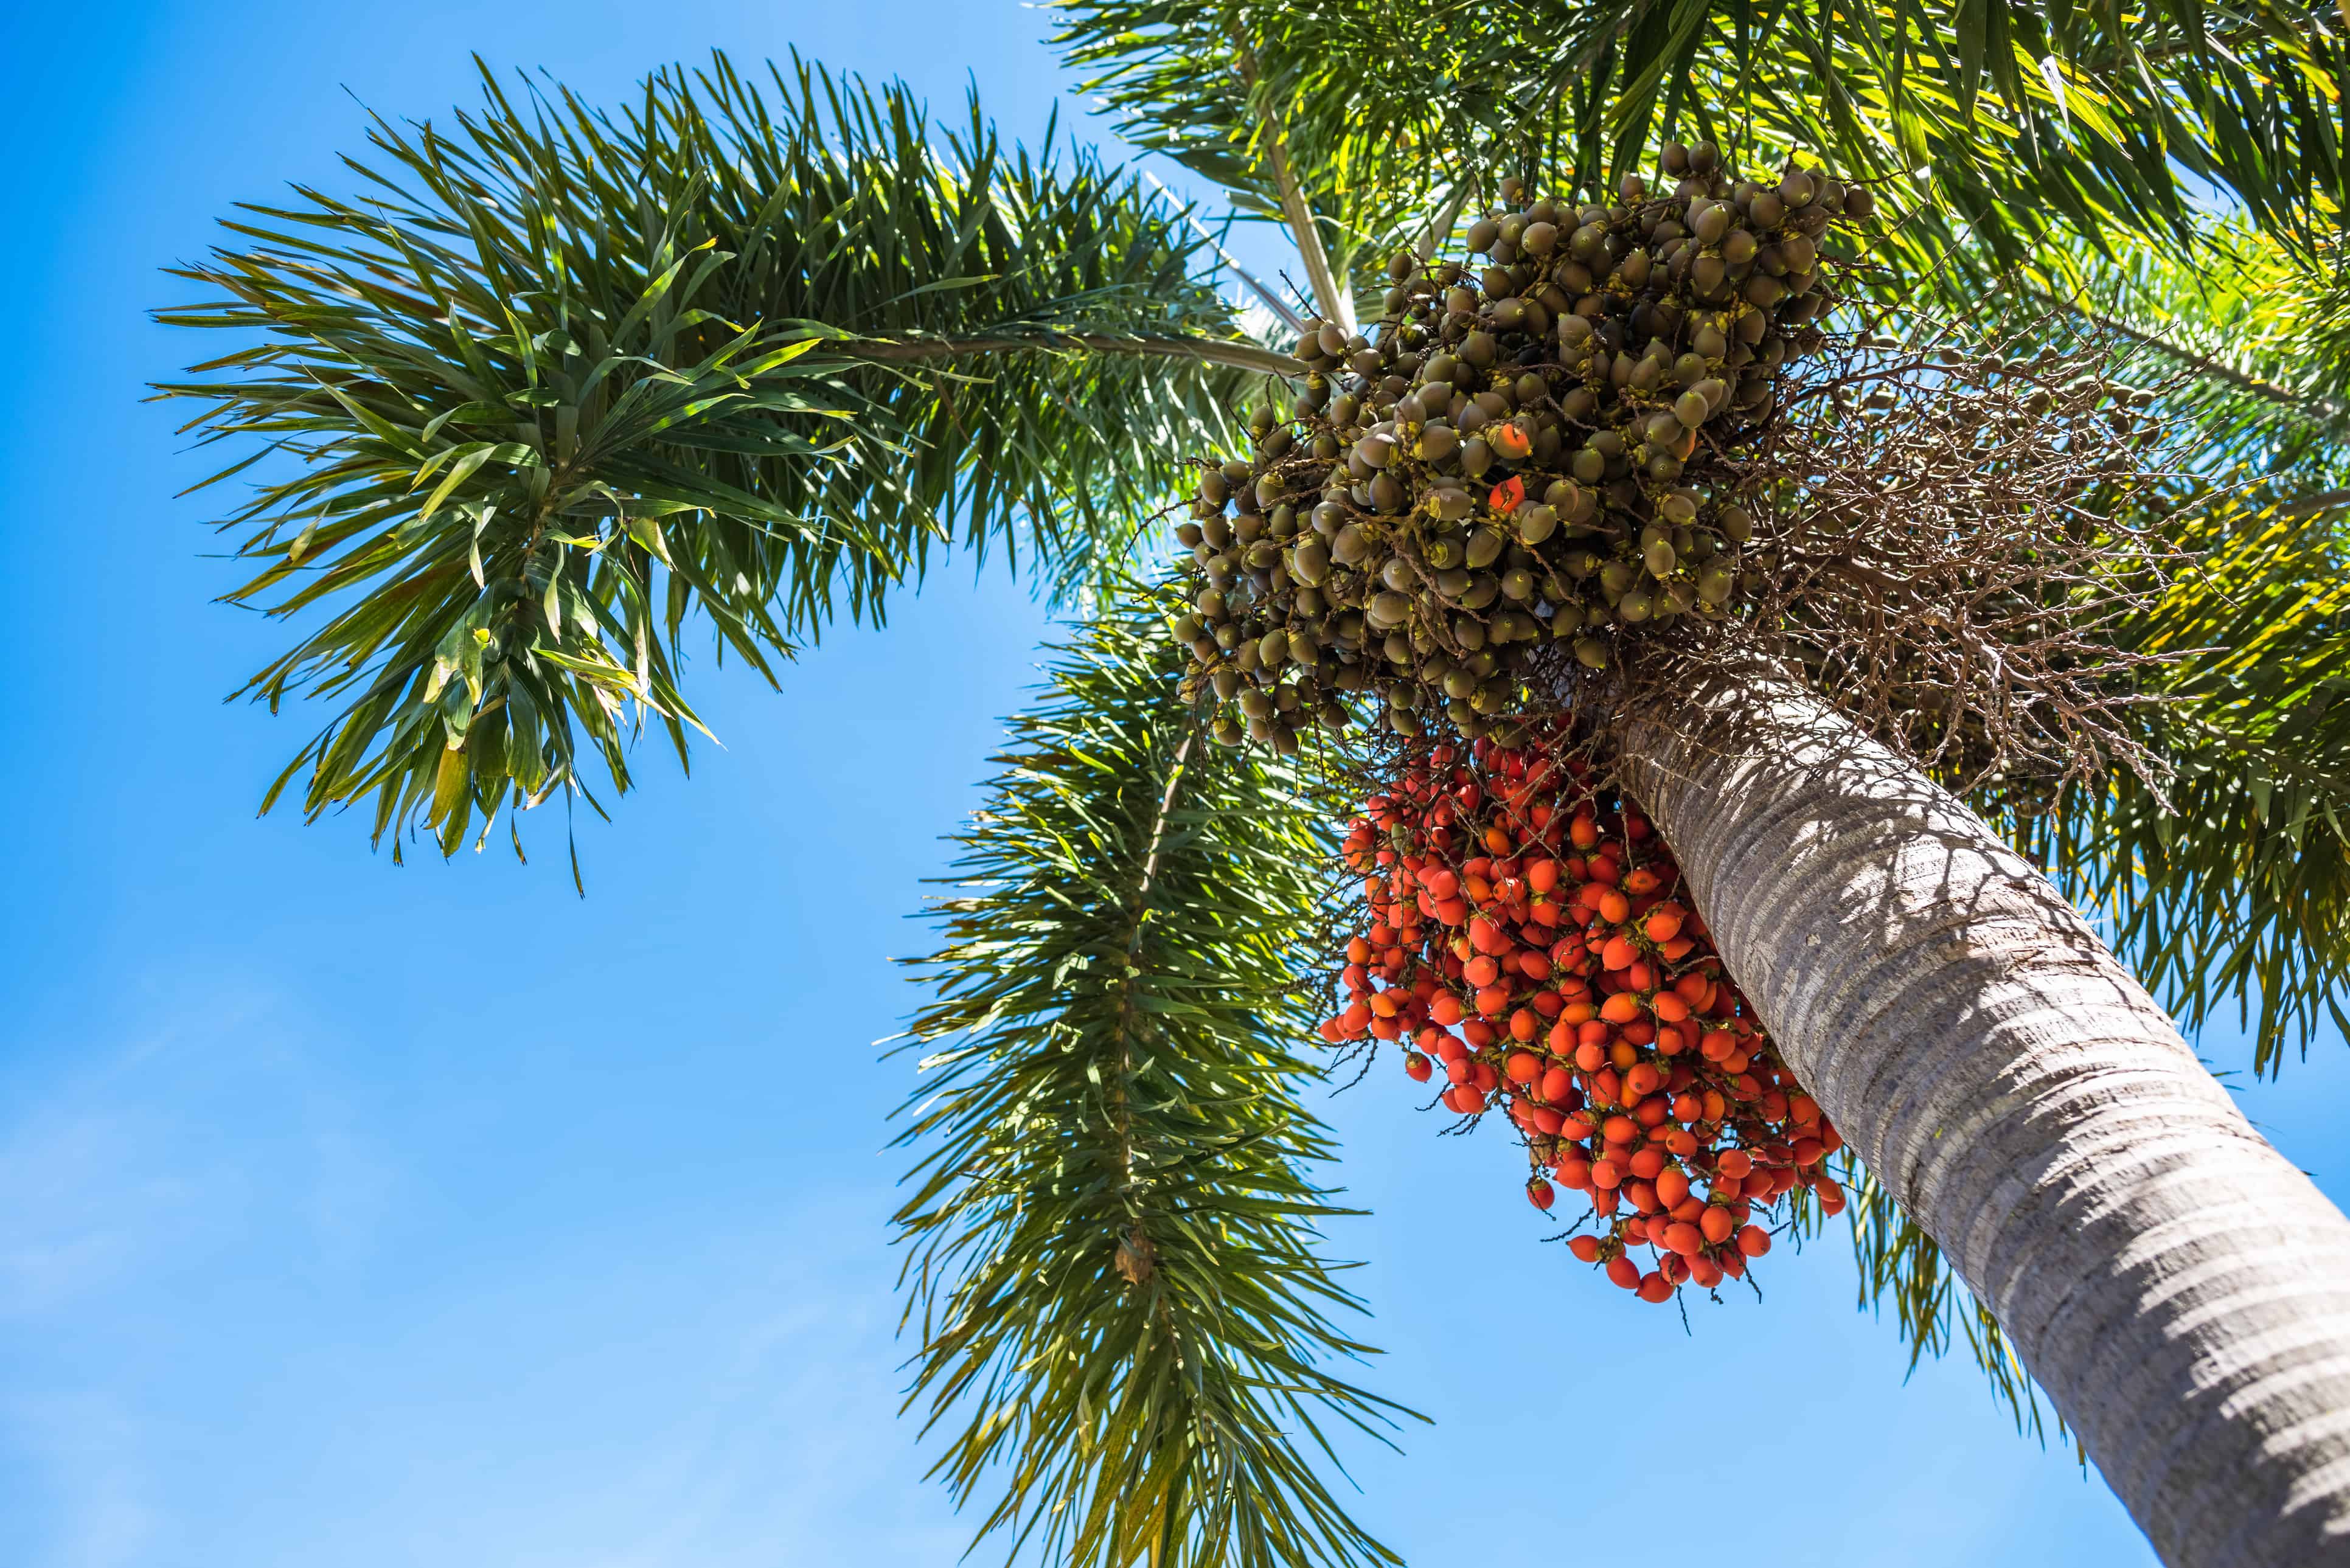 A closeup shot of the underside of a Normanbya normanbyi or black palm tree's canopy, complete with fruit at different stages.